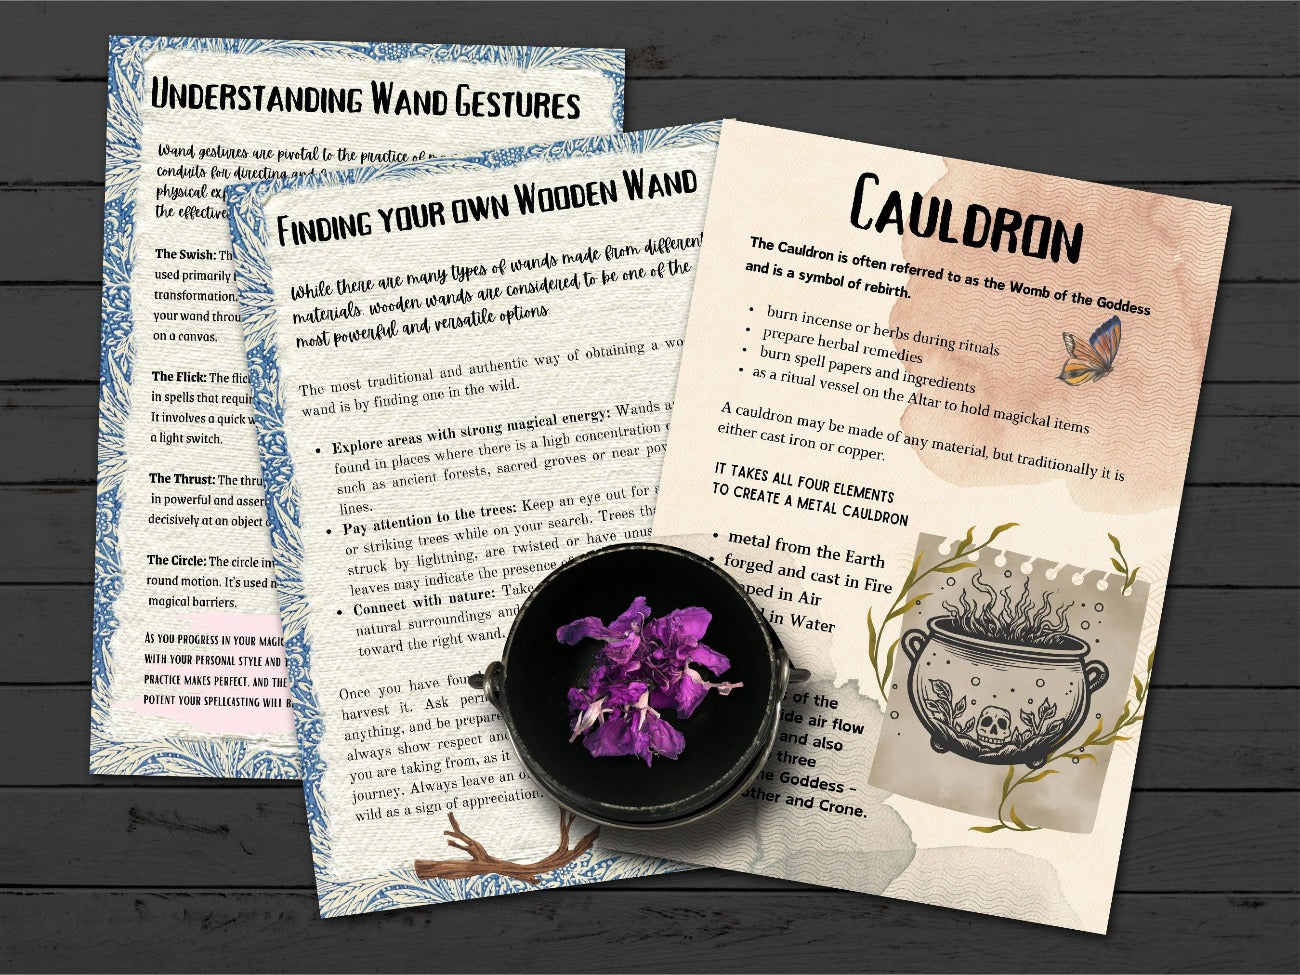 WICCA ZINE Lesson 6 - Understanding Wand Gestures, Finding your own Wooden Wand, and Cauldron pages - Morgana Magick Spell